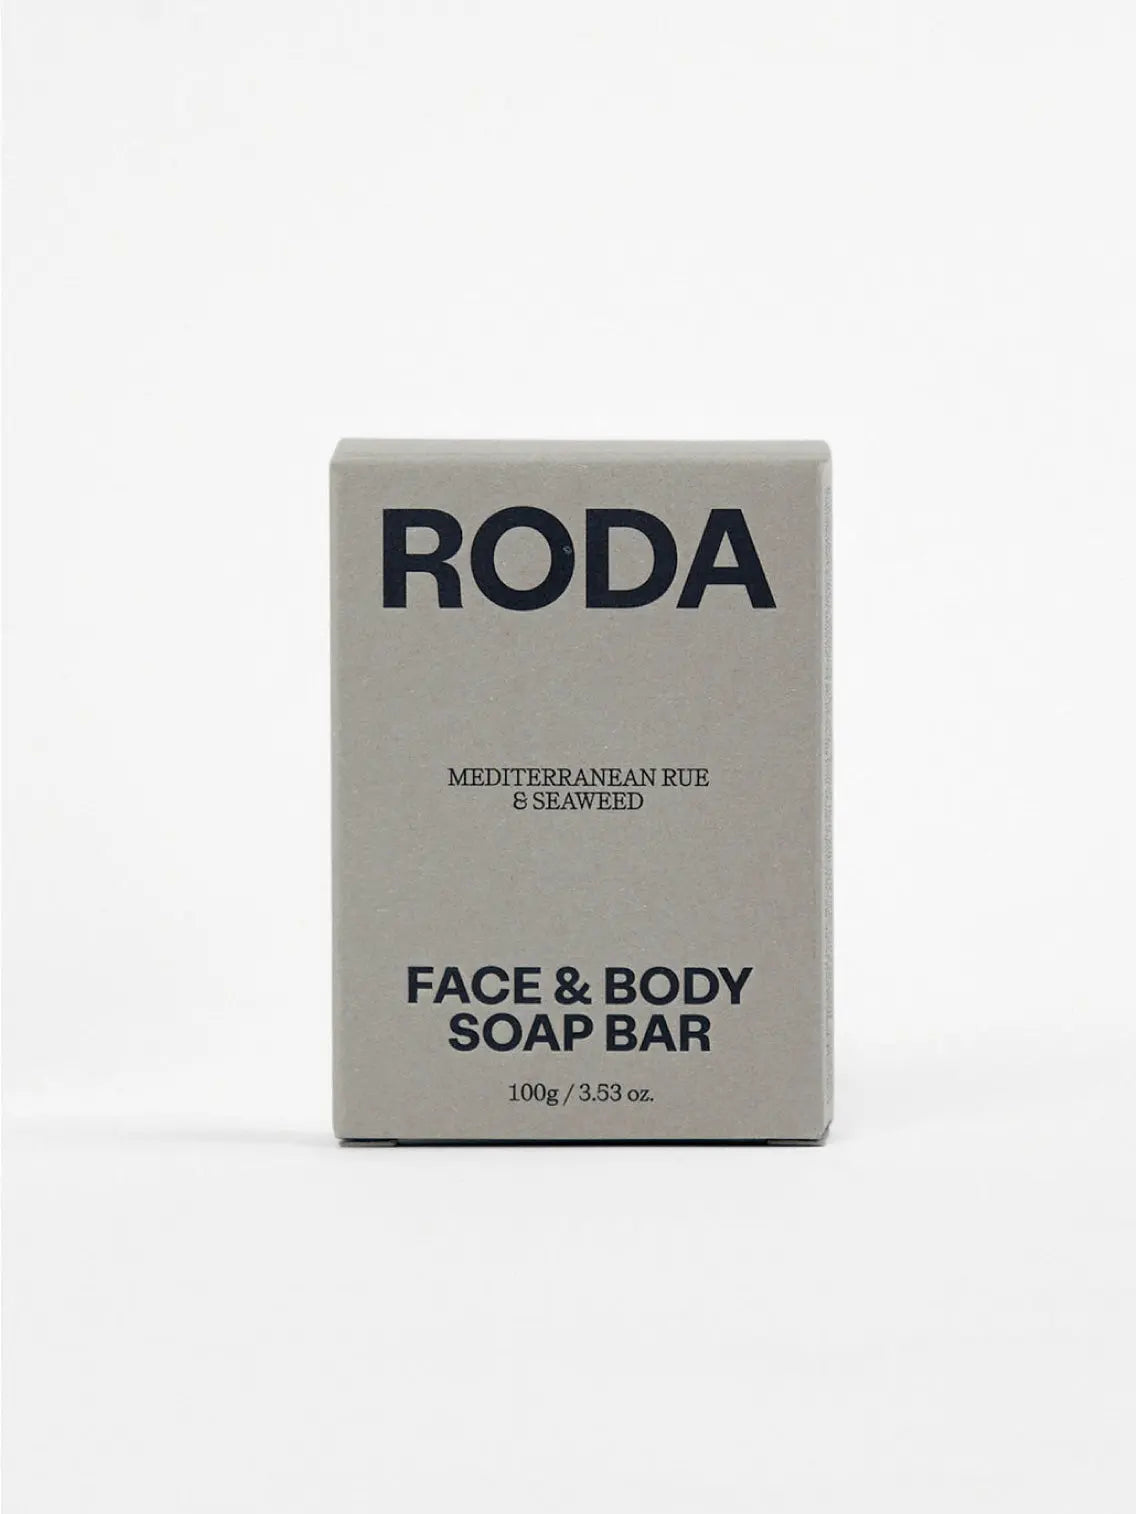 A beige box of Roda Face & Body Soap Bar - Mediterranean Rue & Seaweed is centered against a white background, available at BassalStore in Barcelona. The package is labeled "Mediterranean Rue & Seaweed" and "100g / 3.53 oz.